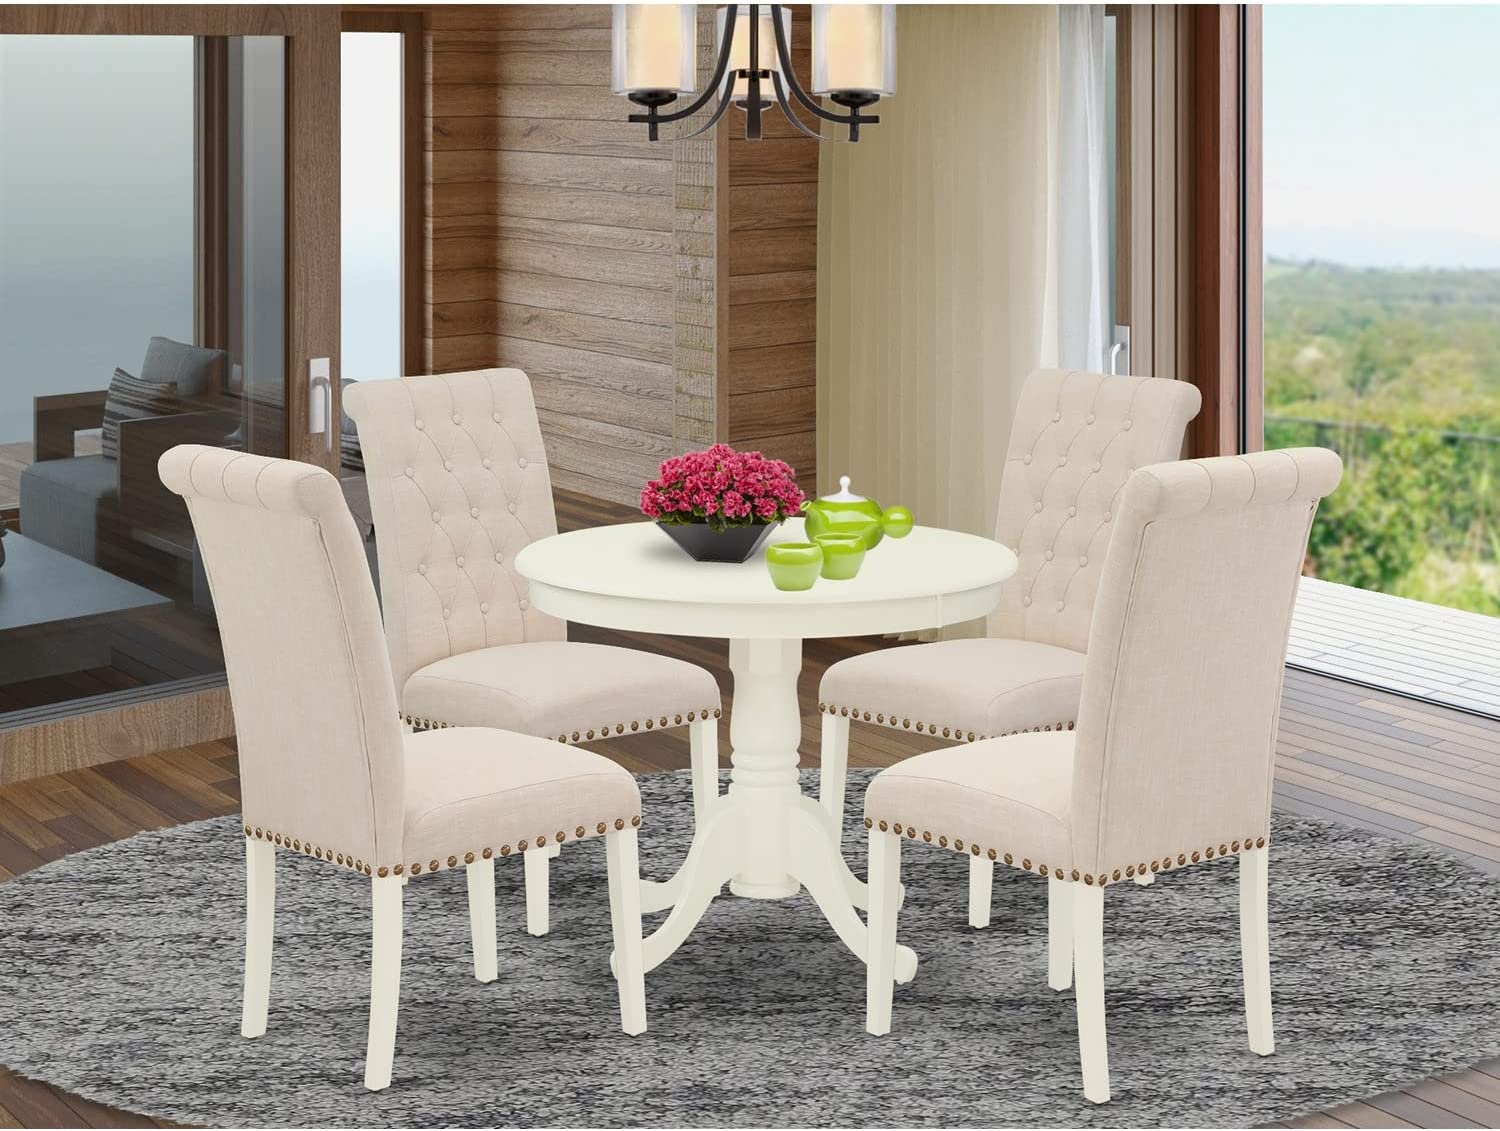 East West Furniture 5Pc Dining Set Includes a Small Round Dinette Table and Four Parson Chairs with Light Beige Fabric, Linen White Finish